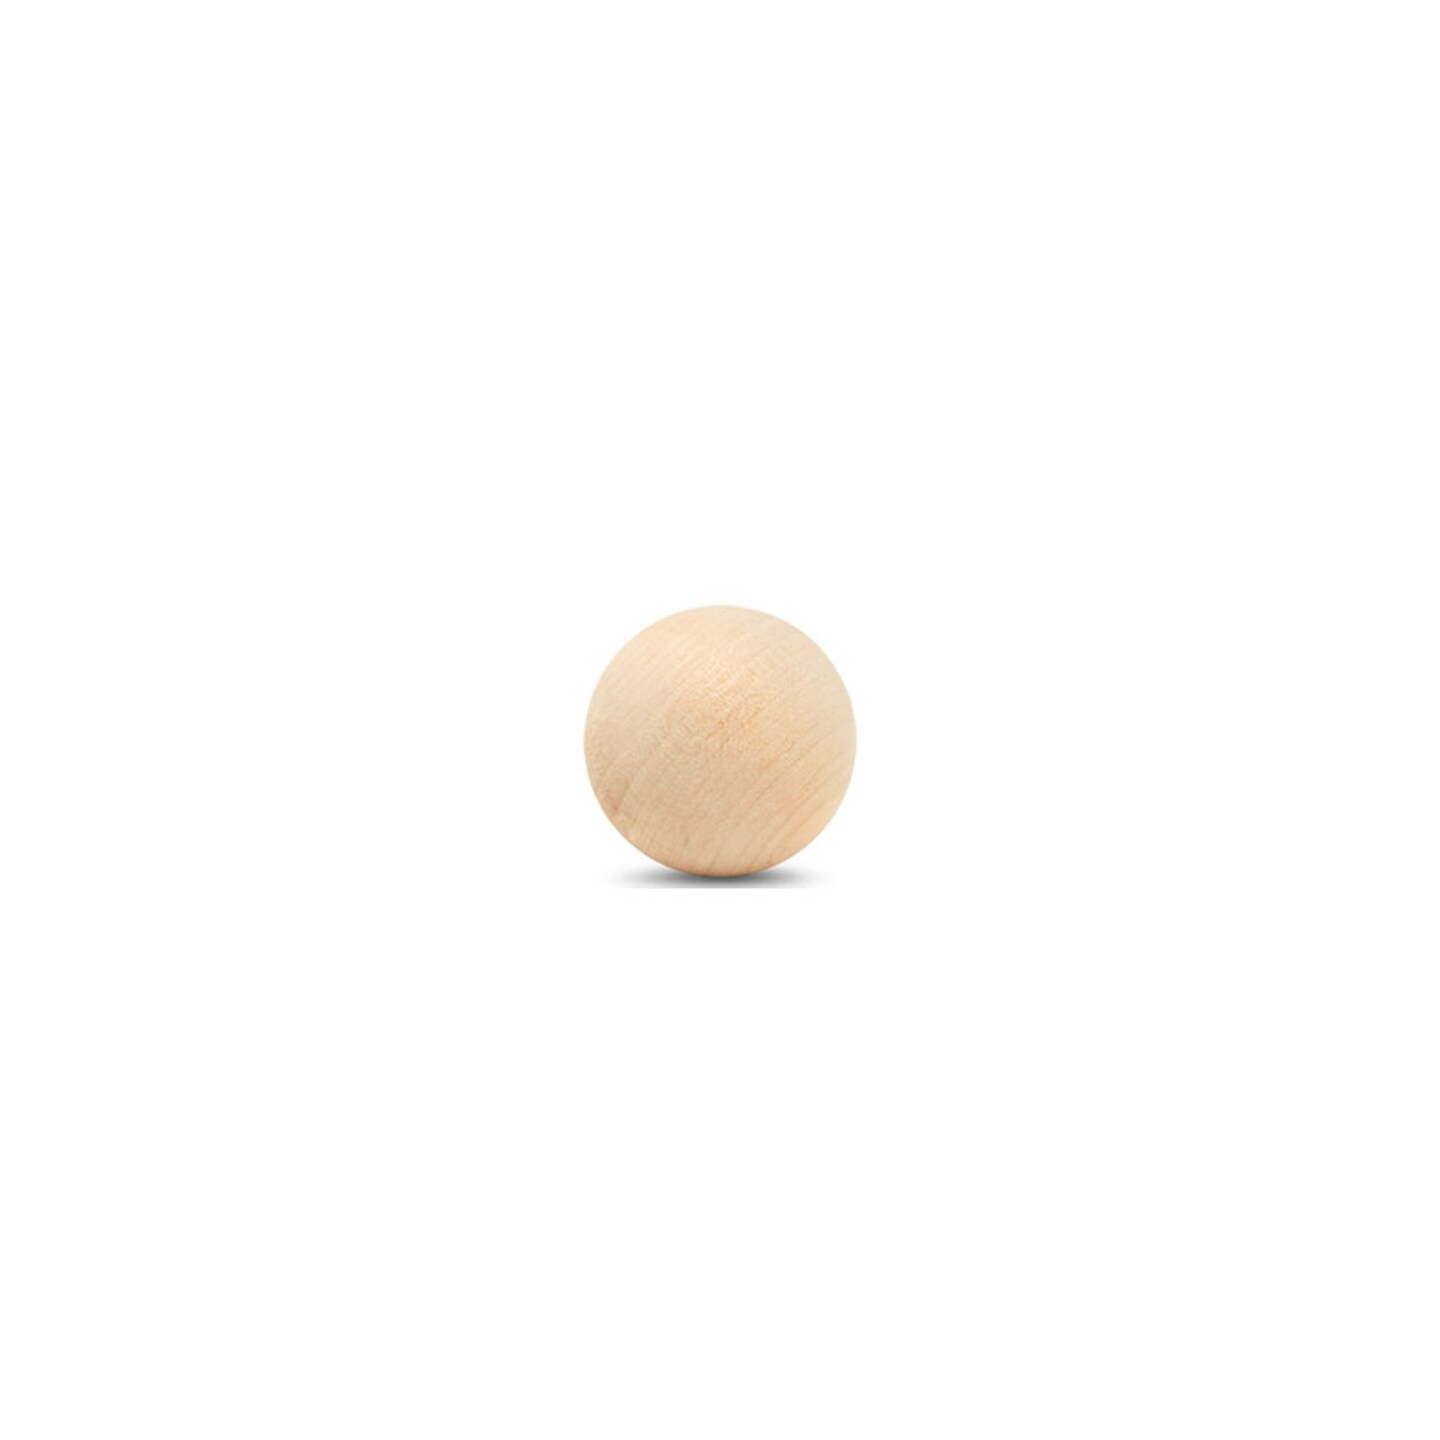 7/8 Inch Small Wood Balls, Pack of 250 Wooden Balls for Crafts and DIY  Project, Hardwood Birch Wood Balls, by Woodpeckers 